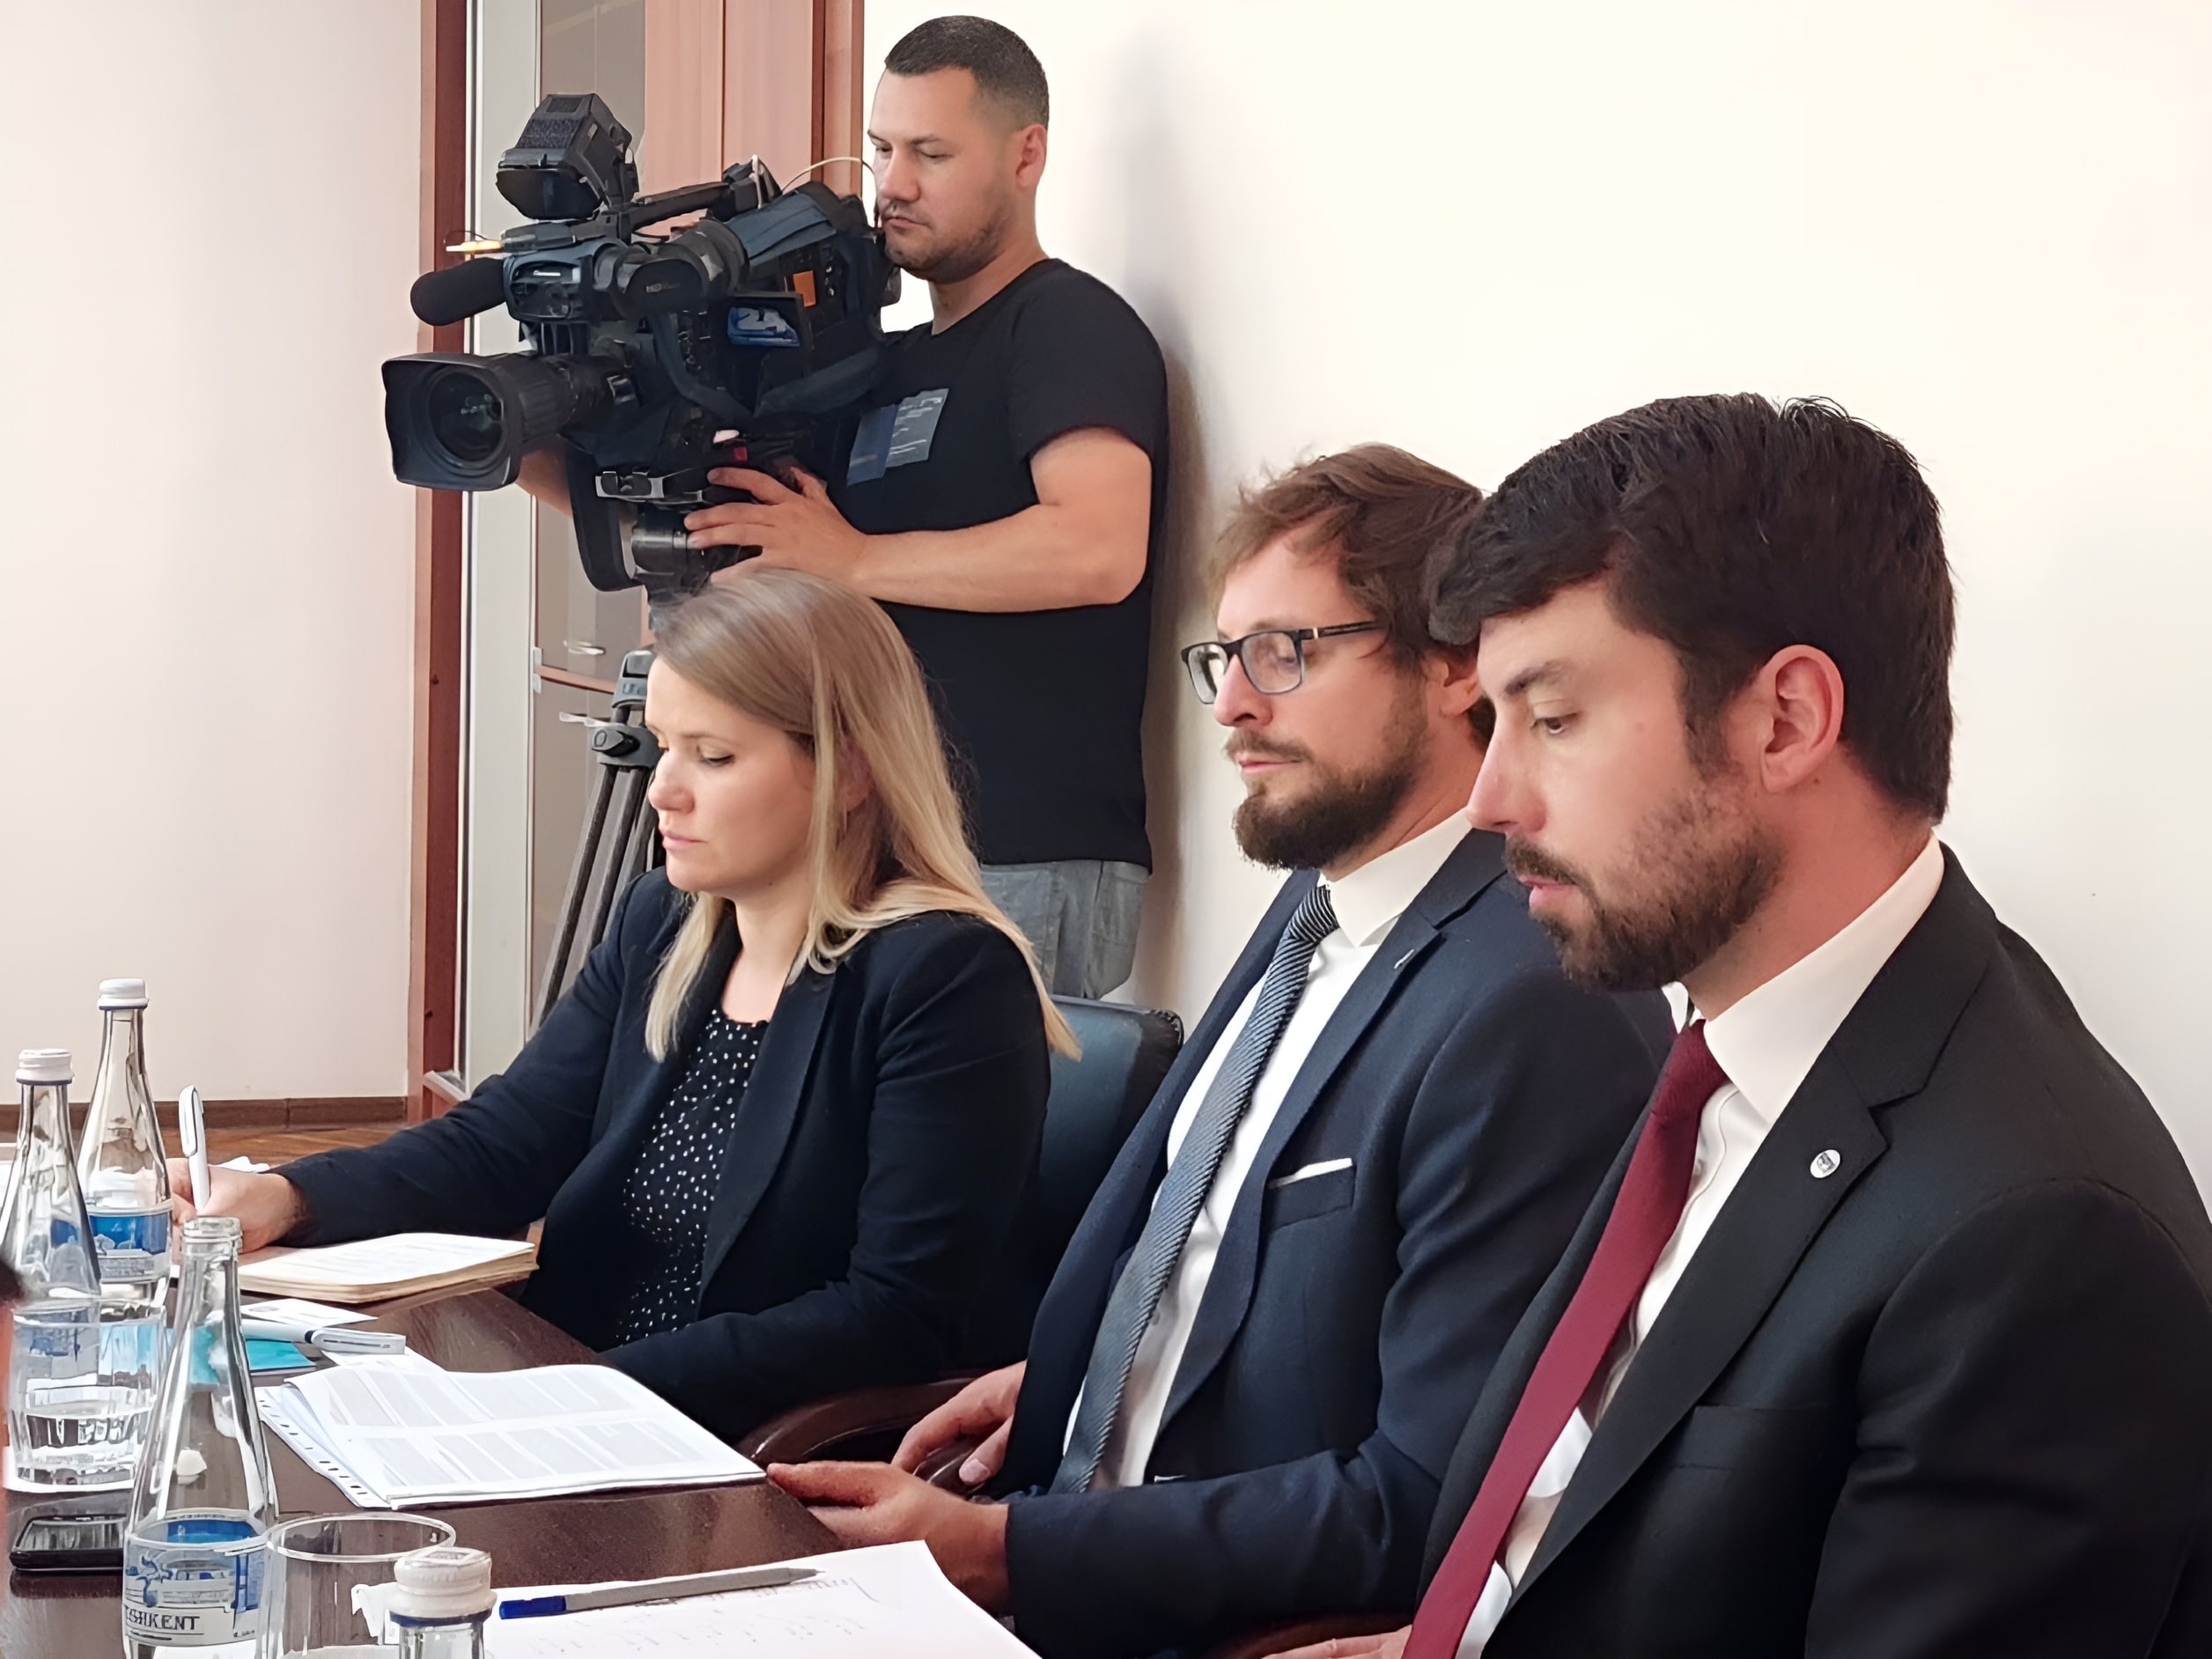 The Authorized Person for Human Rights met with the OSCE ODIHR delegation